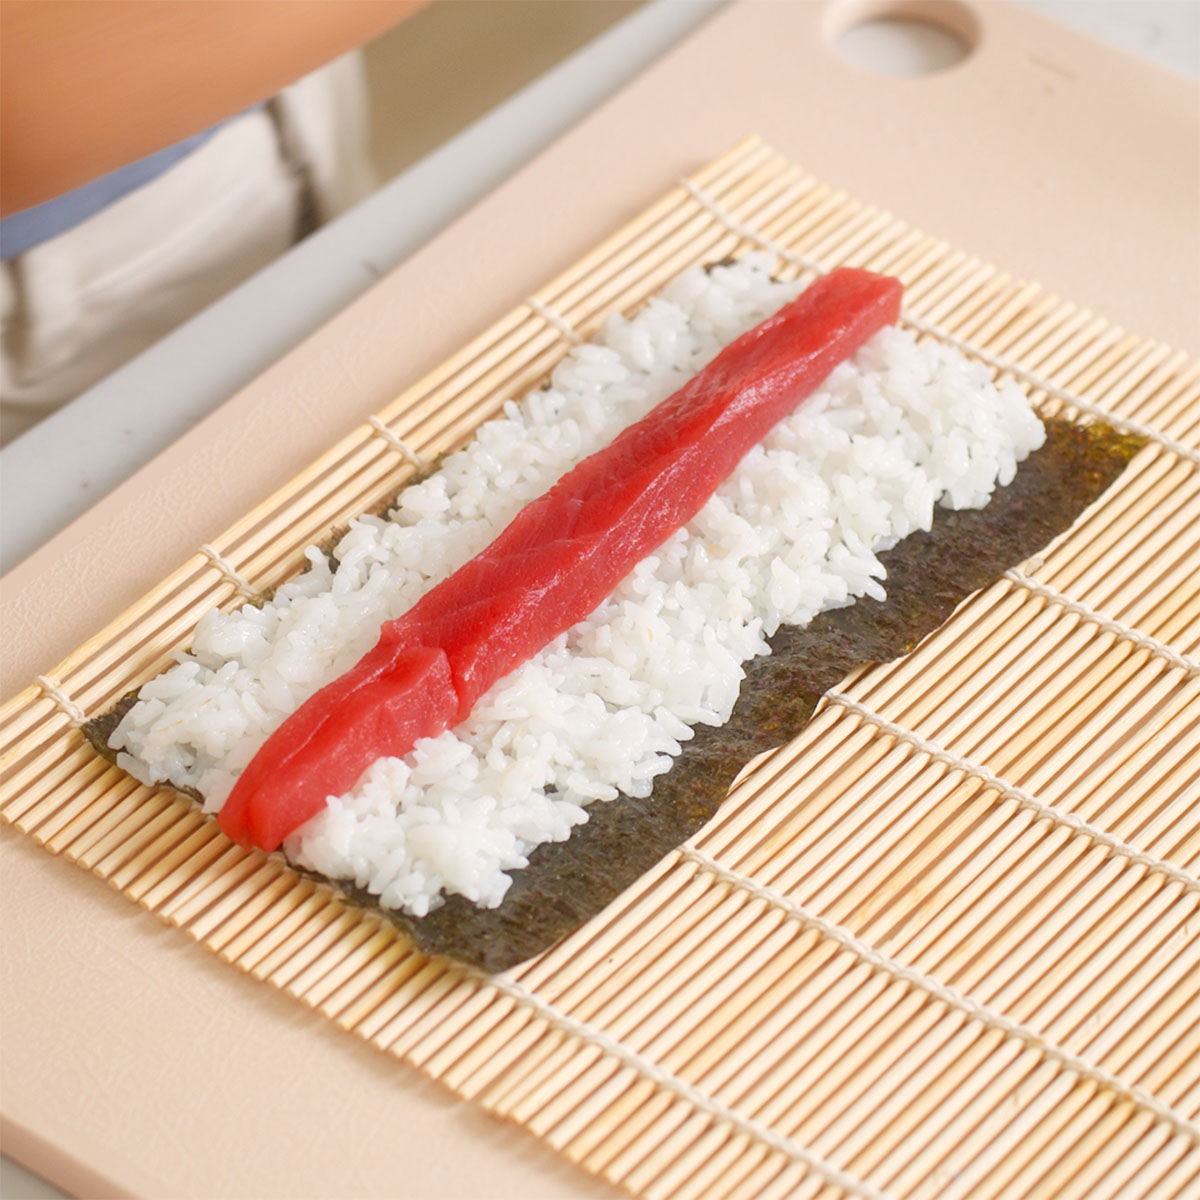 An assembled tuna roll ready to be rolled up.